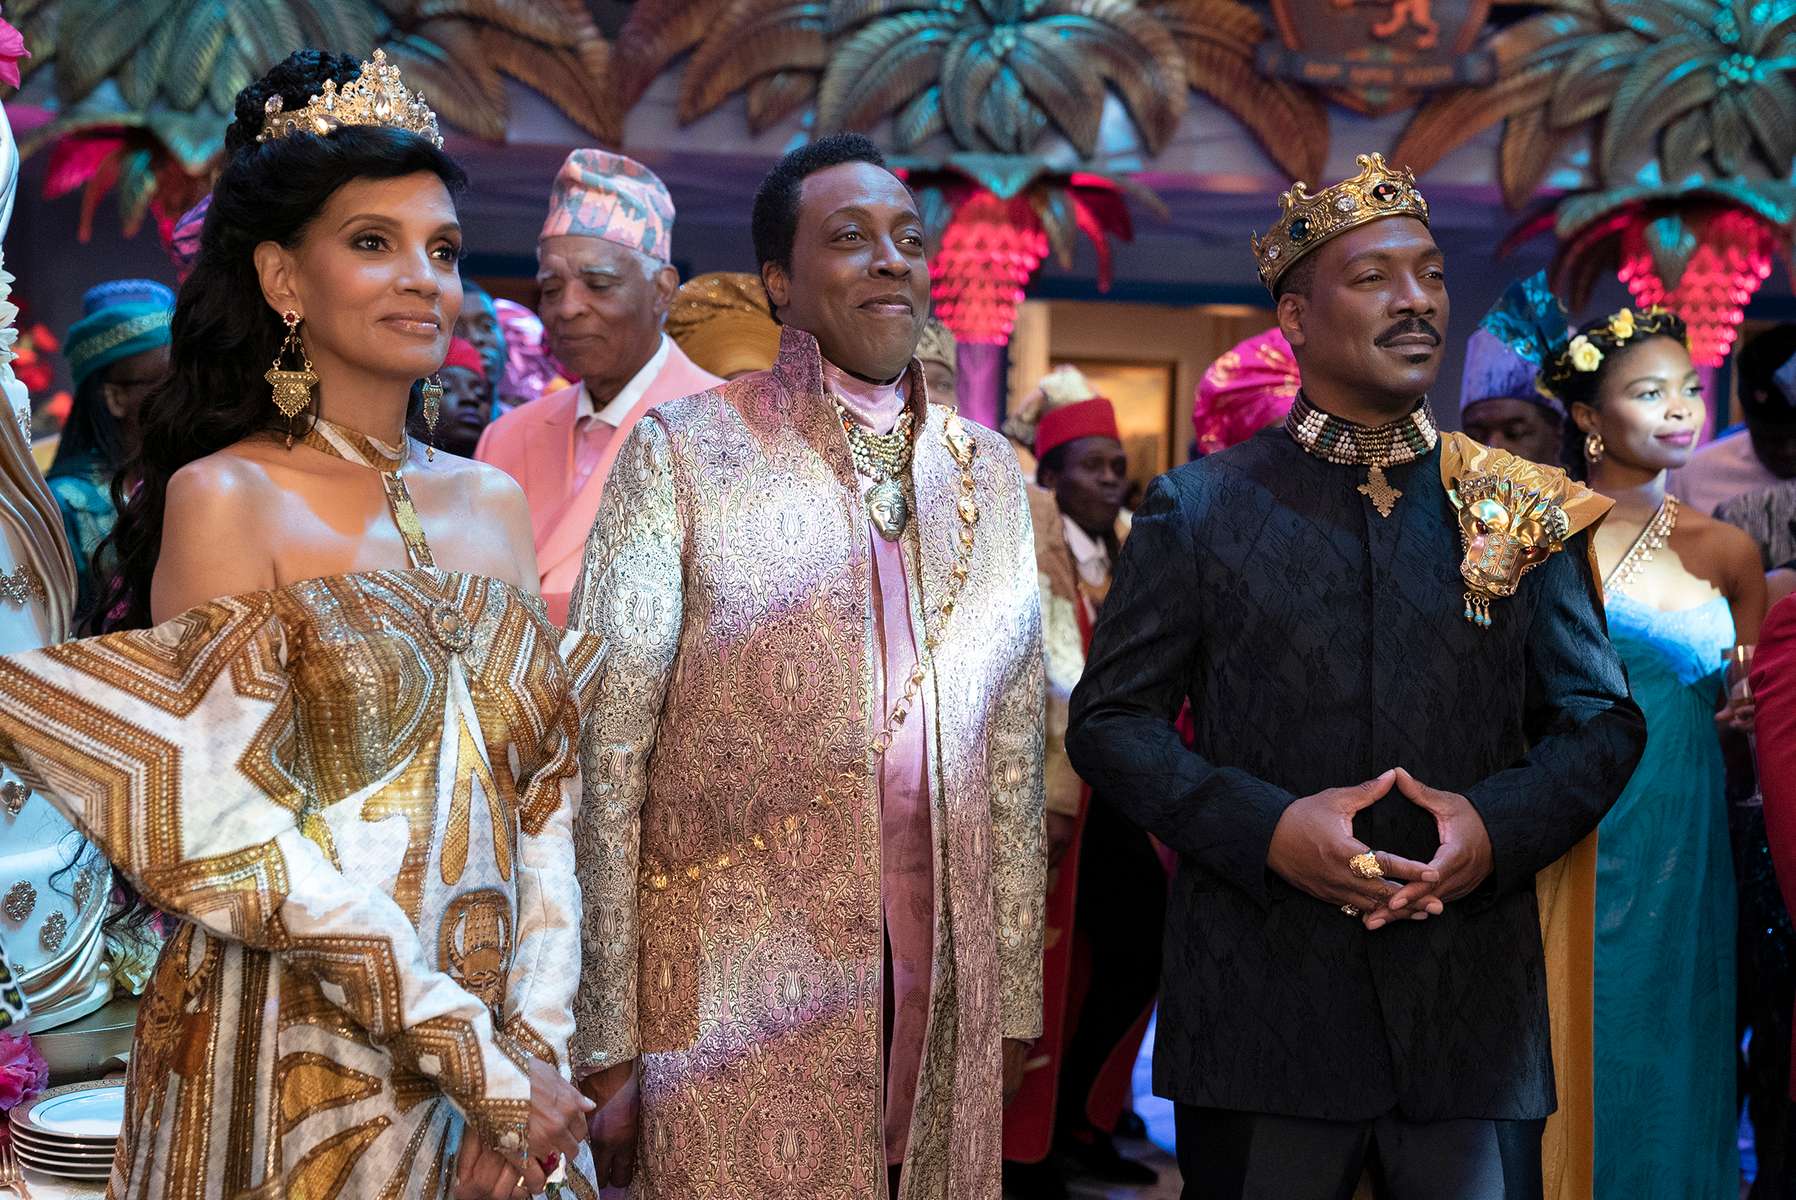 Shari Headley, Arsenio Hall and Eddie Murphy star in COMING 2 AMERICA Photo: Annette Brown© 2020 Paramount Pictures